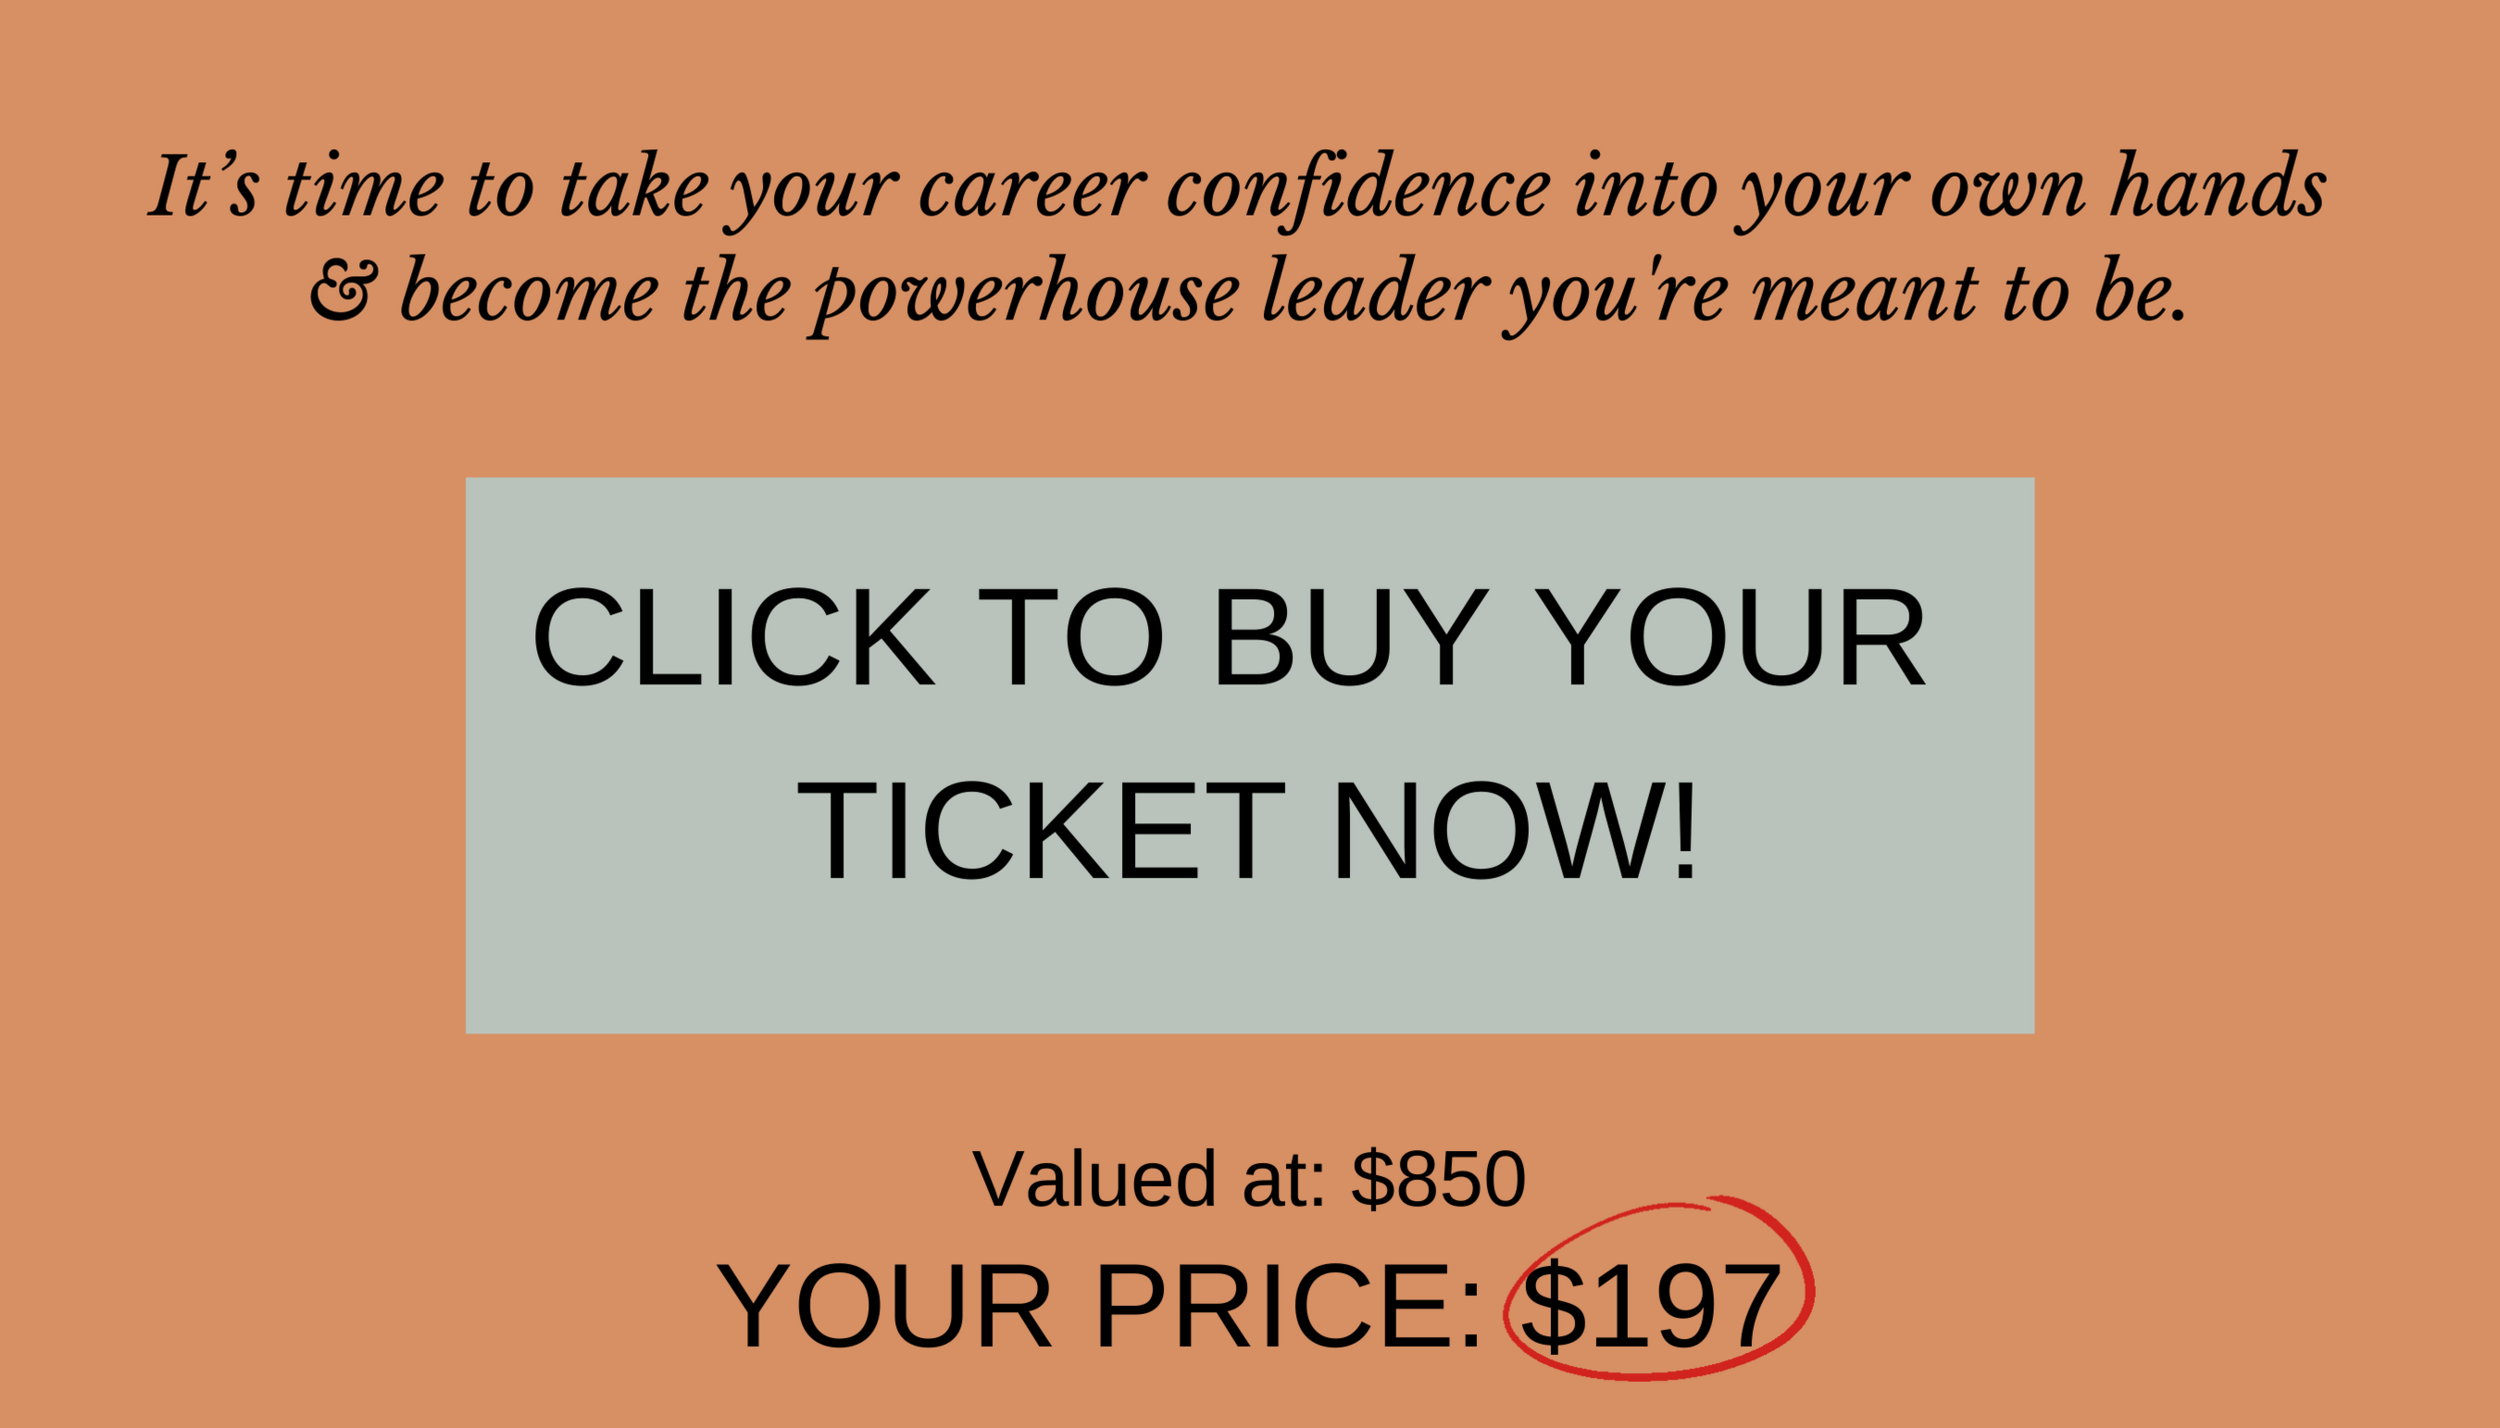 Copy of It’s time to take your career confidence into your own hands! BUY YOUR TICKET NOW! $197.png